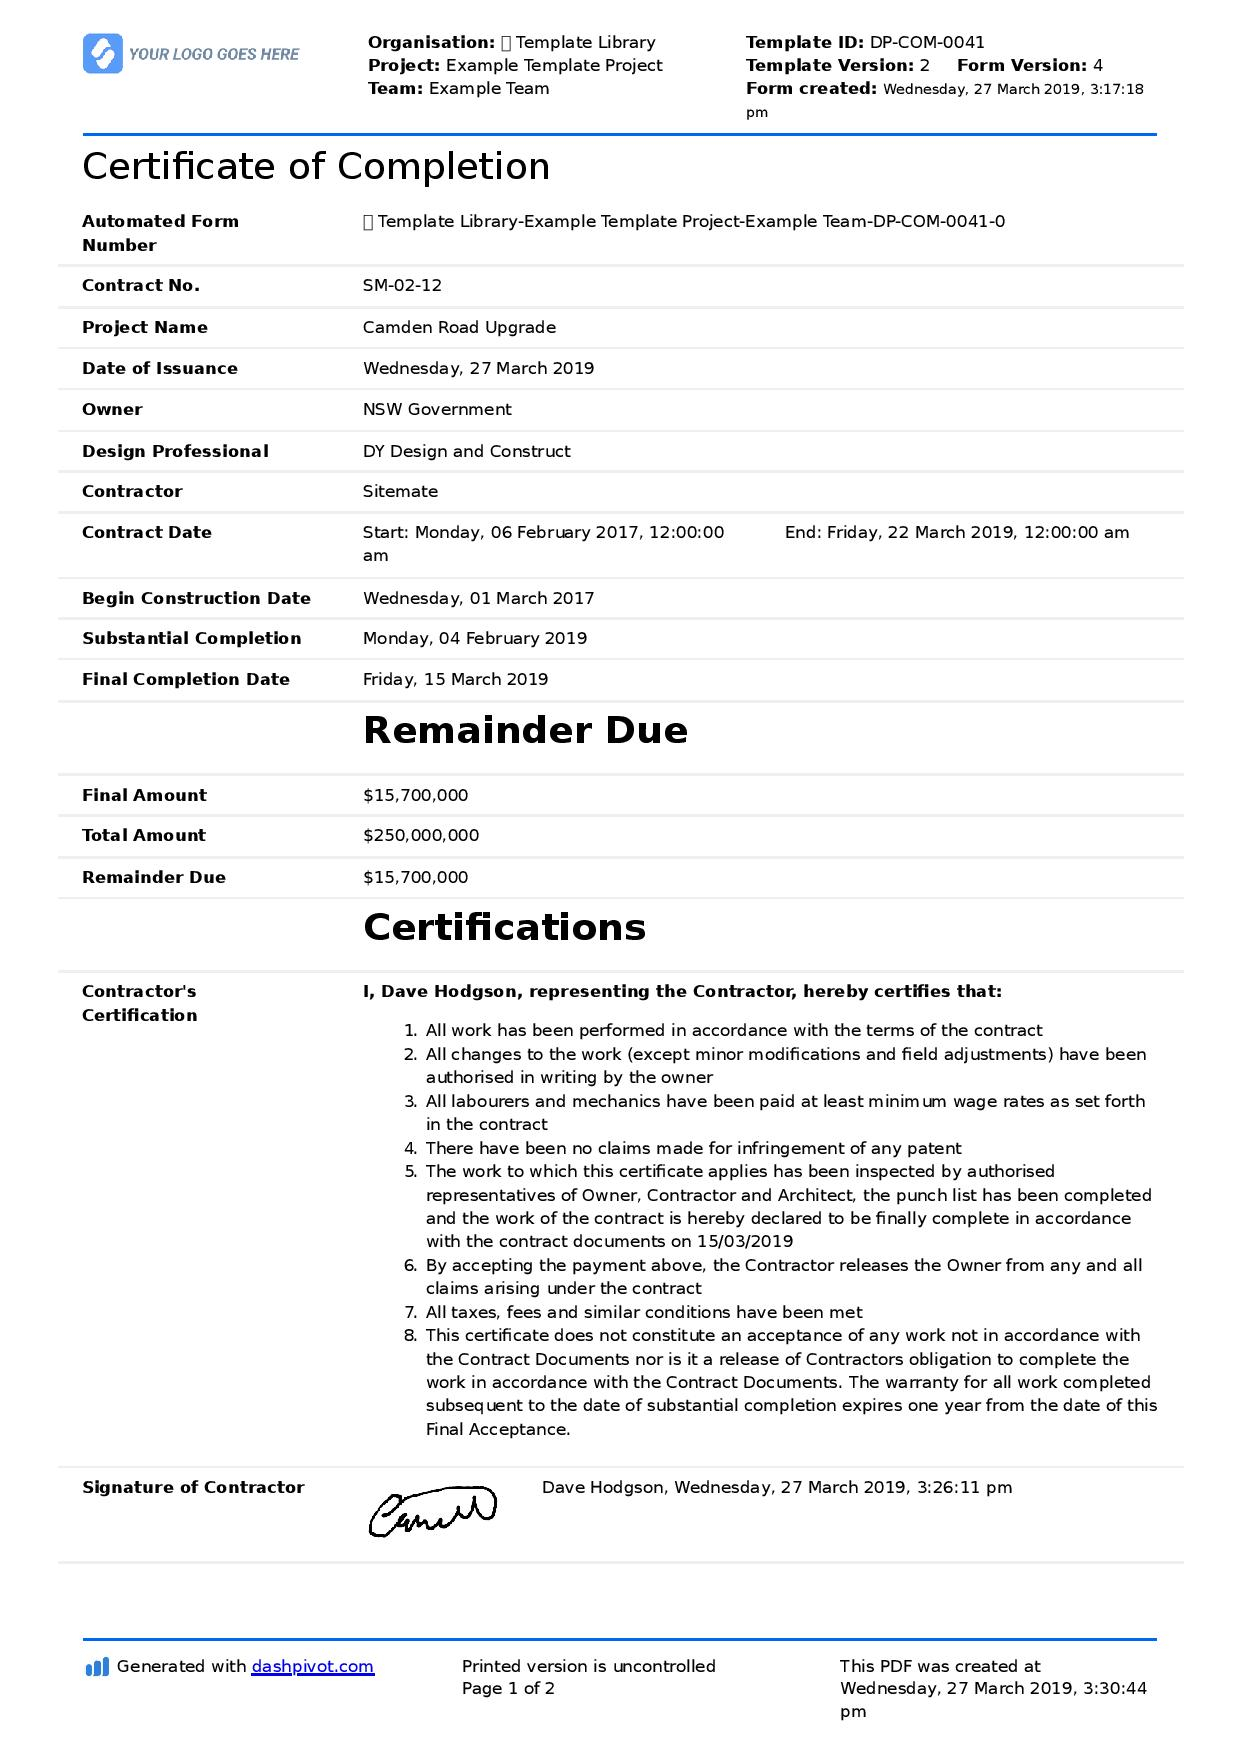 Certificate of Completion for Construction (Free template + sample) In Certificate Template For Project Completion